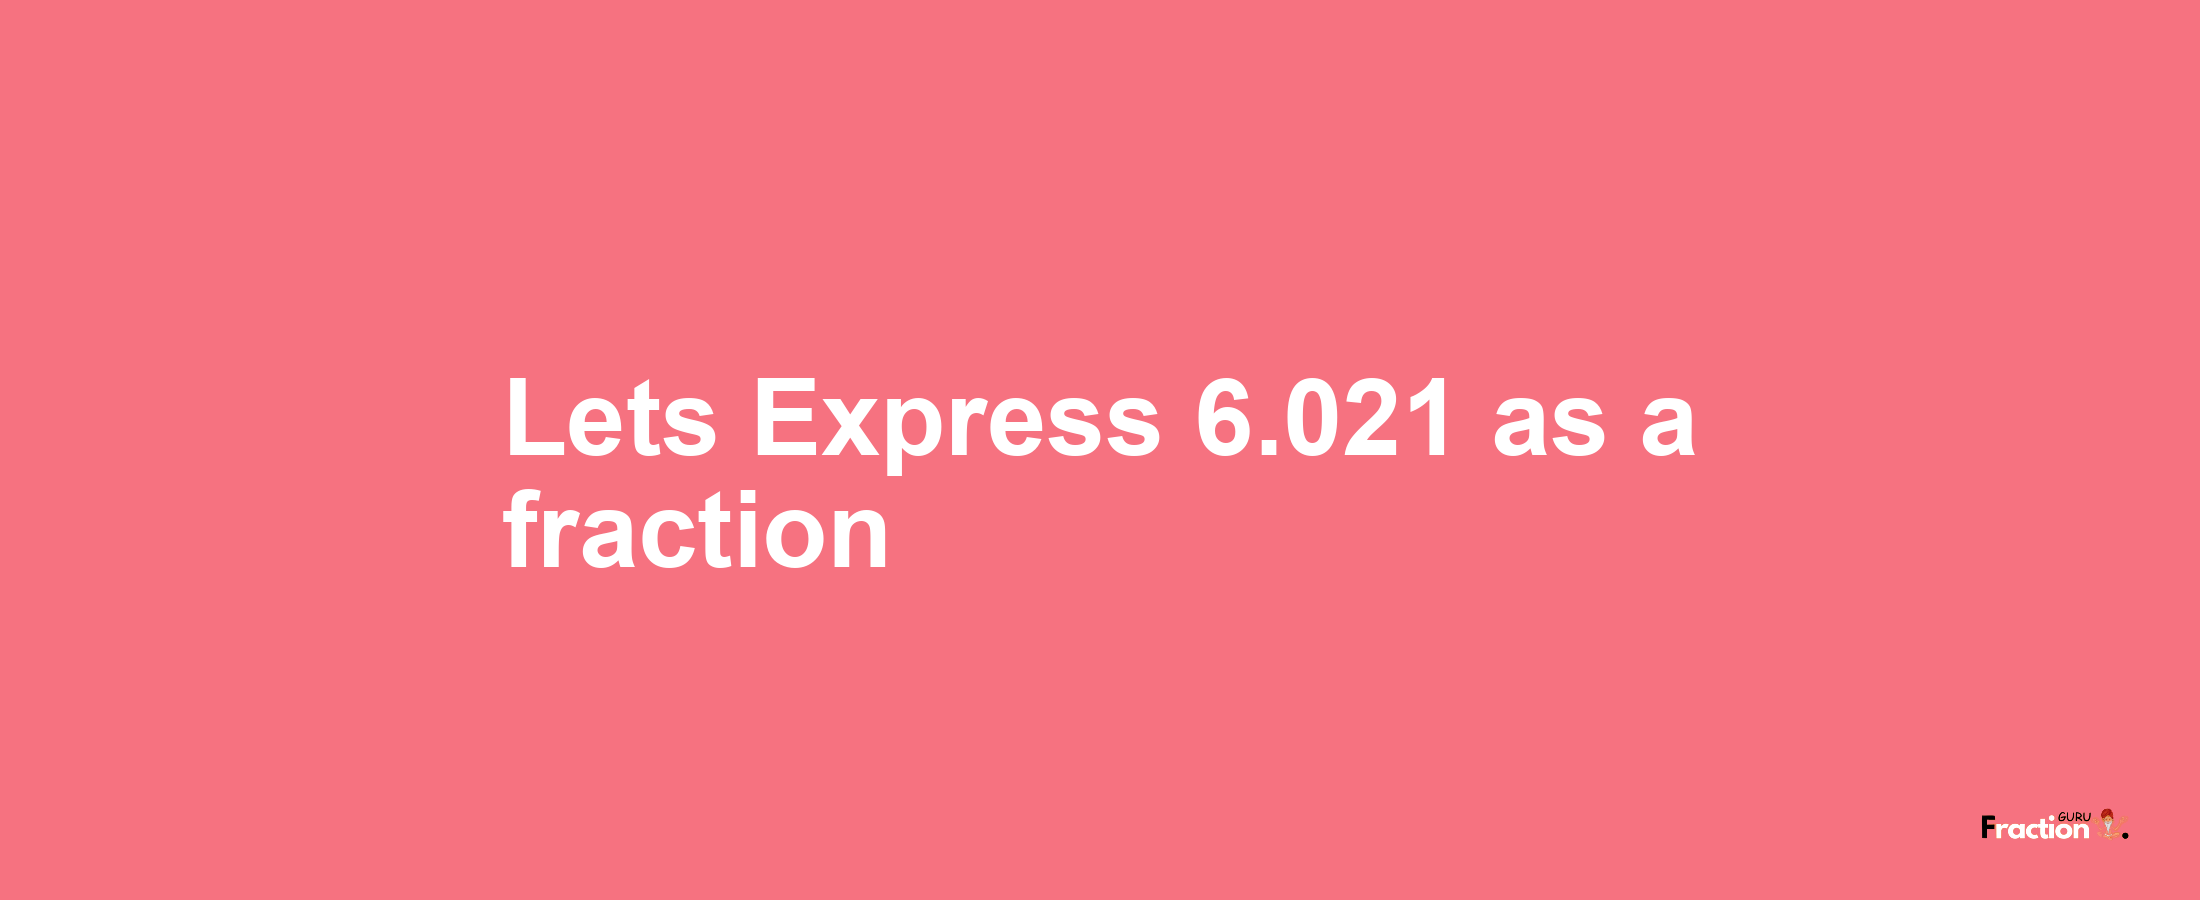 Lets Express 6.021 as afraction